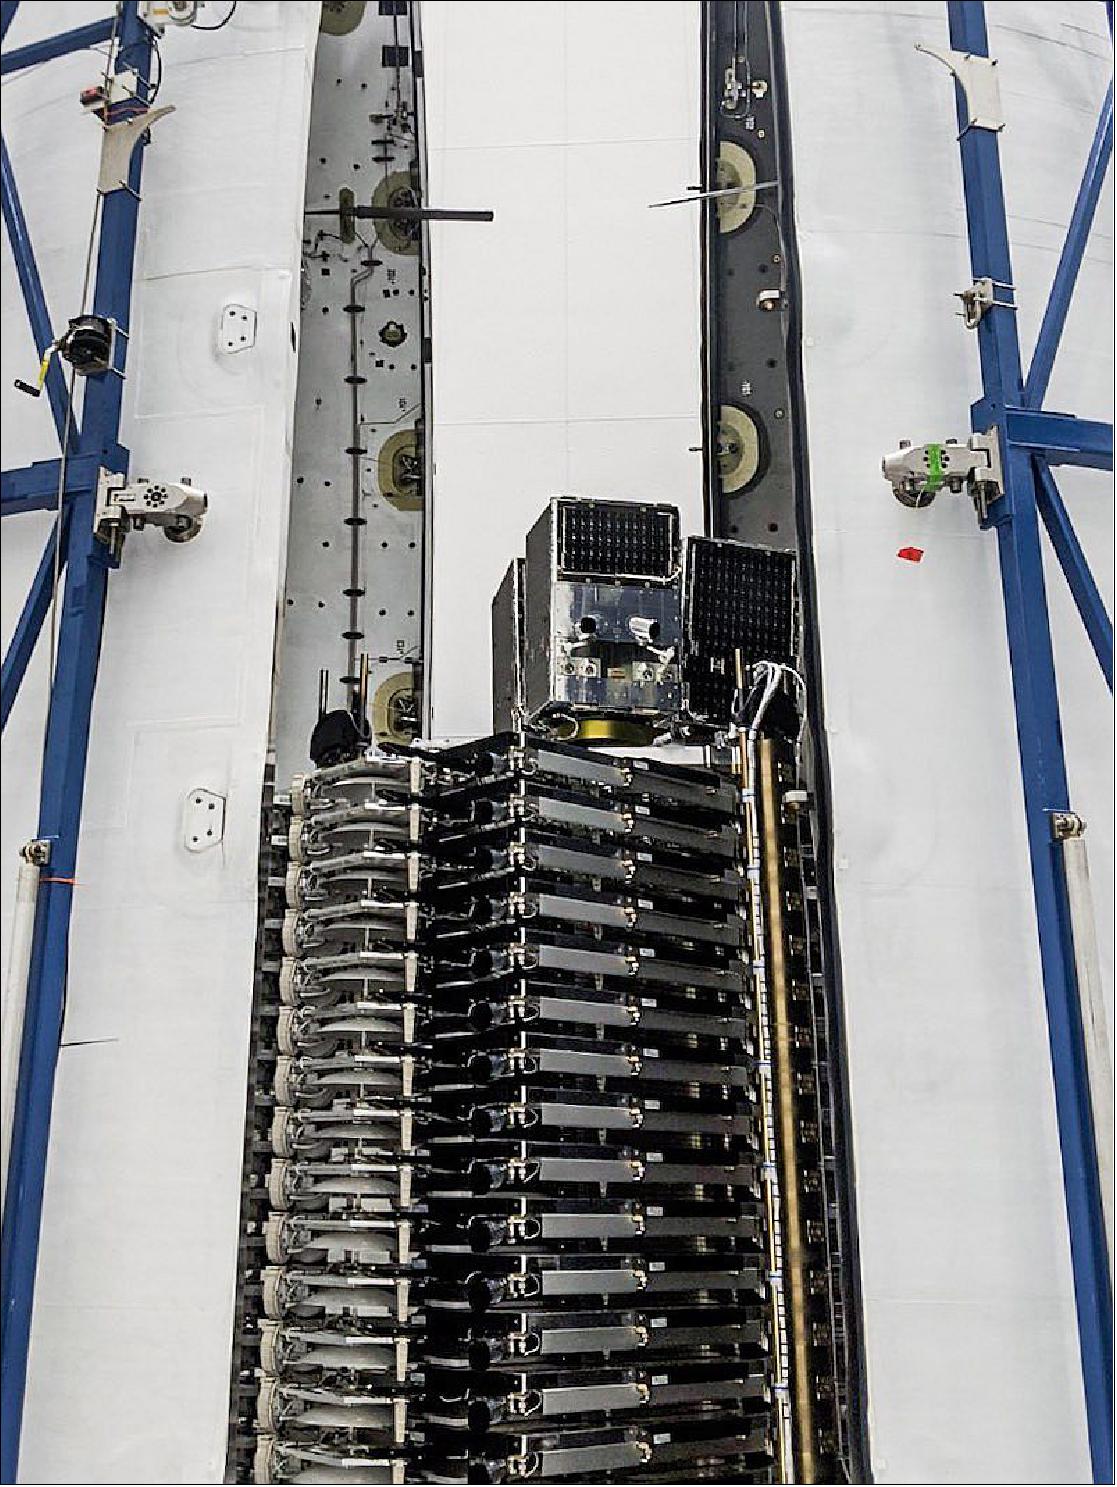 Figure 11: Three of Planet’s SkySat Earth-imaging microsatellites are mounted on top of 58 SpaceX Starlink Internet satellites for launch on 13 June 2020 (image credit: Planet / SpaceX)